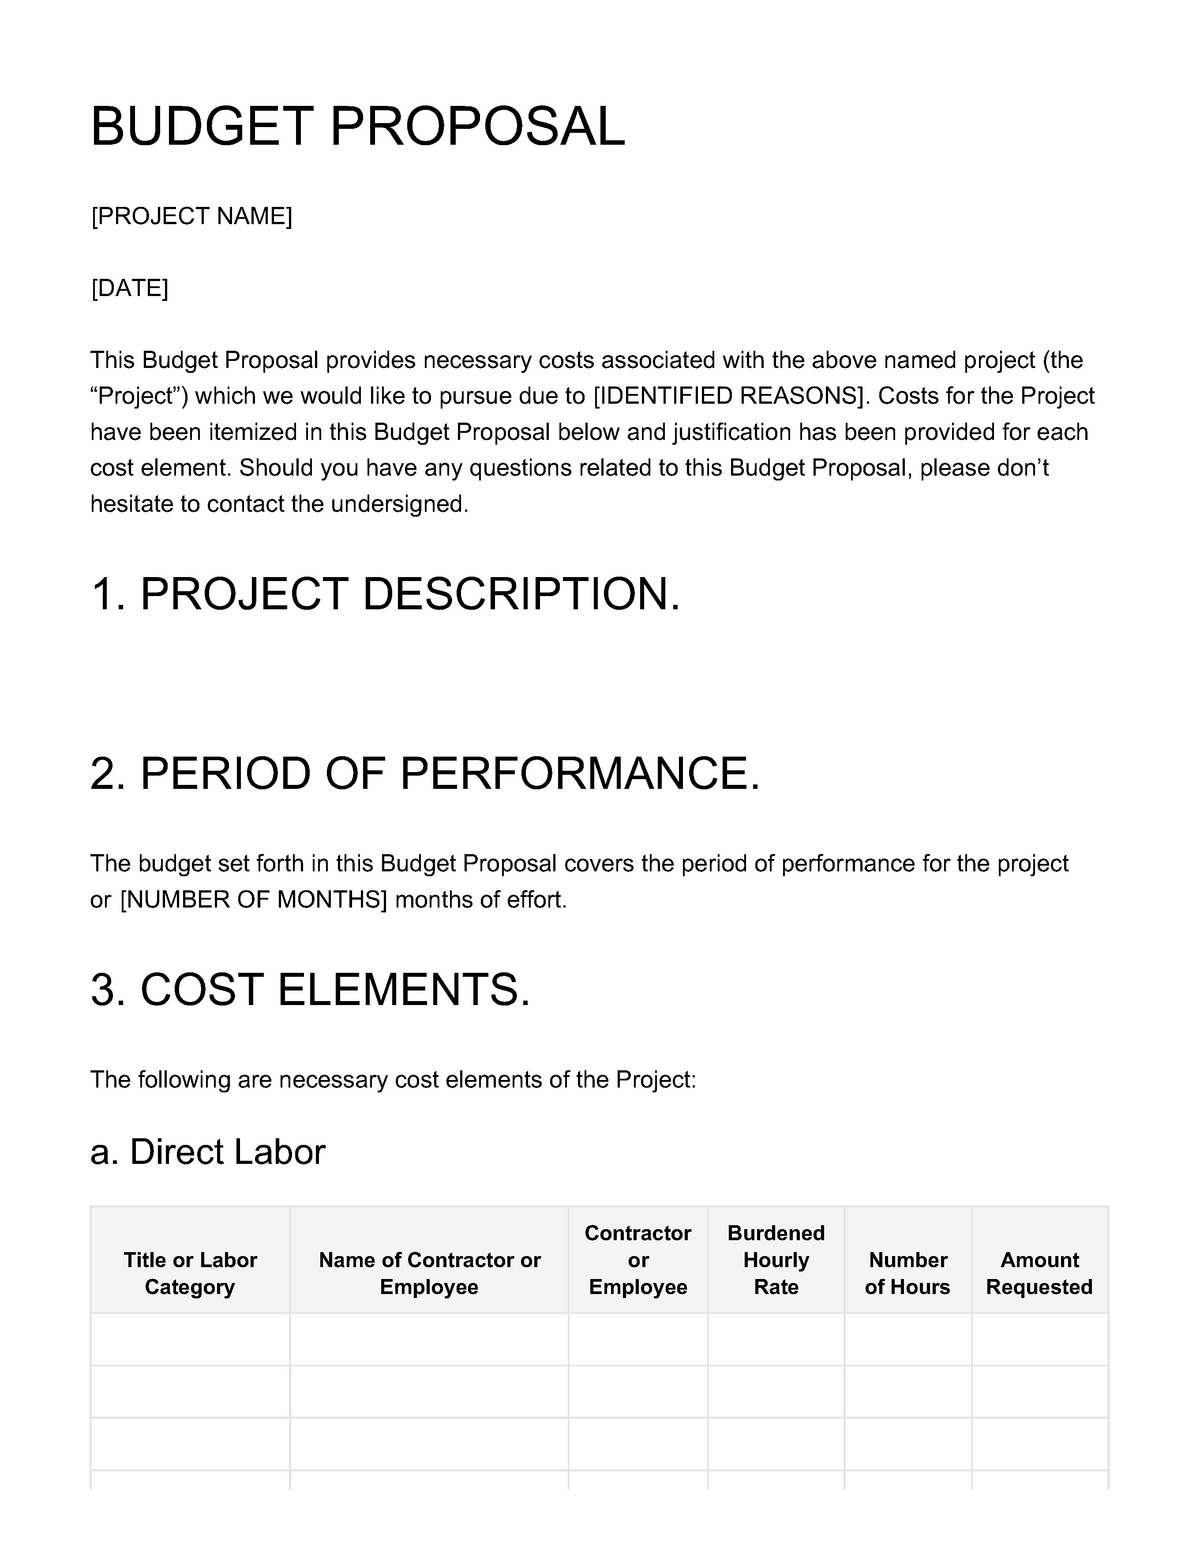 template-sample-budget-proposal-budget-proposal-project-name-date